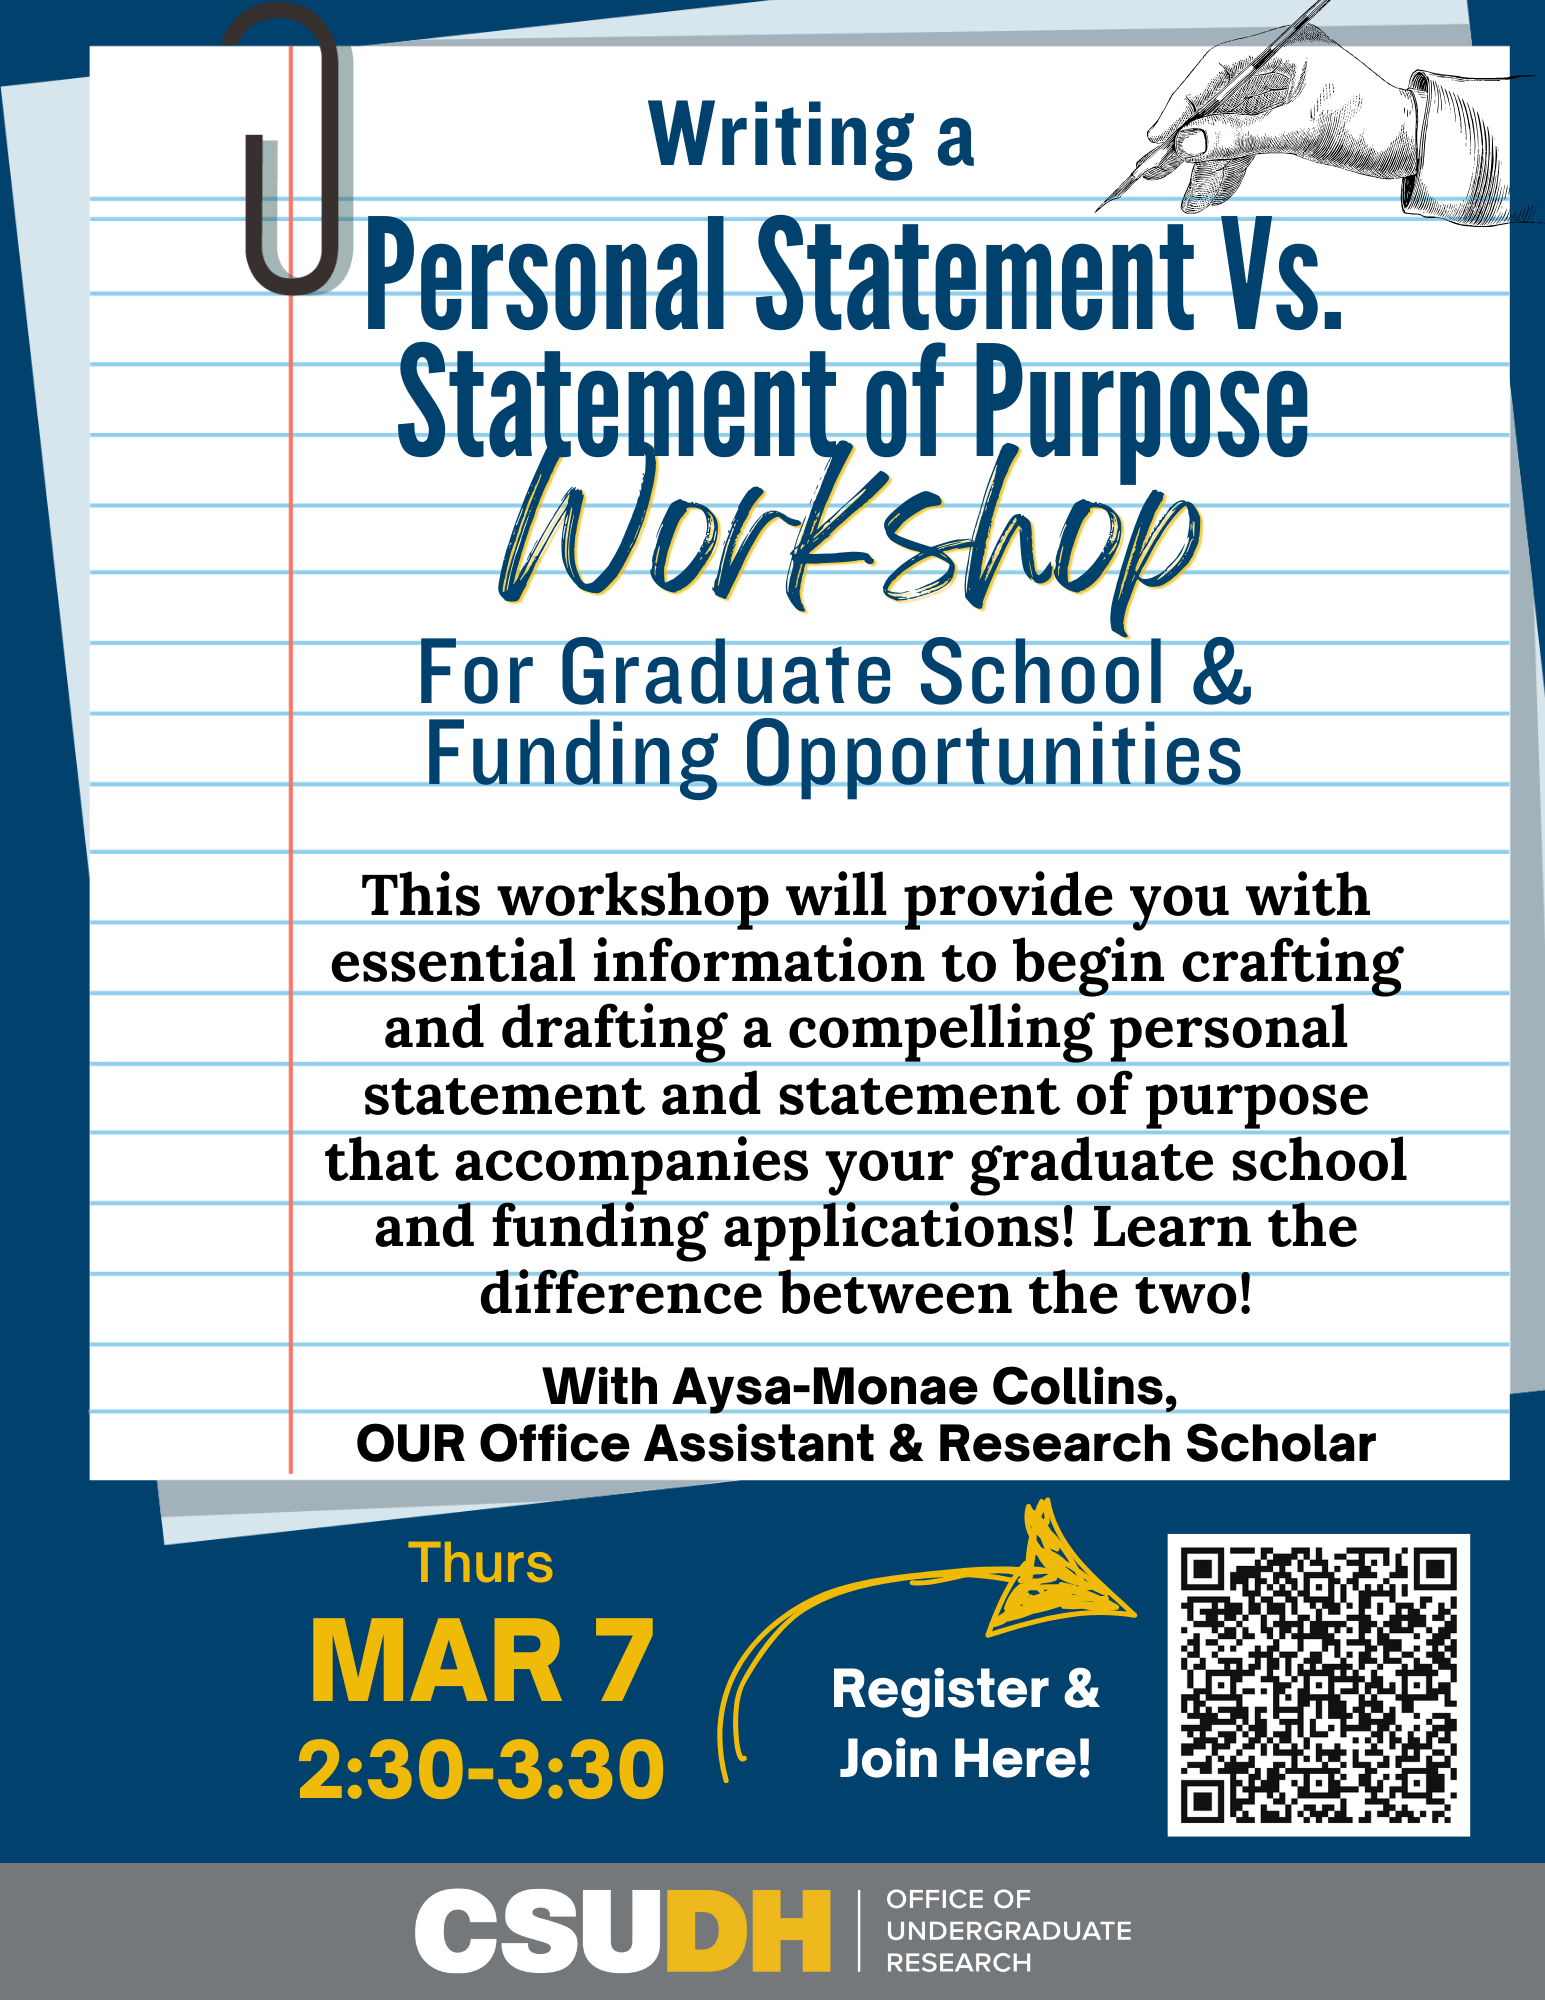 Writing-a-Personal-Statement-Vs.-Statement-of-Purpose-Flyer-3-7-24